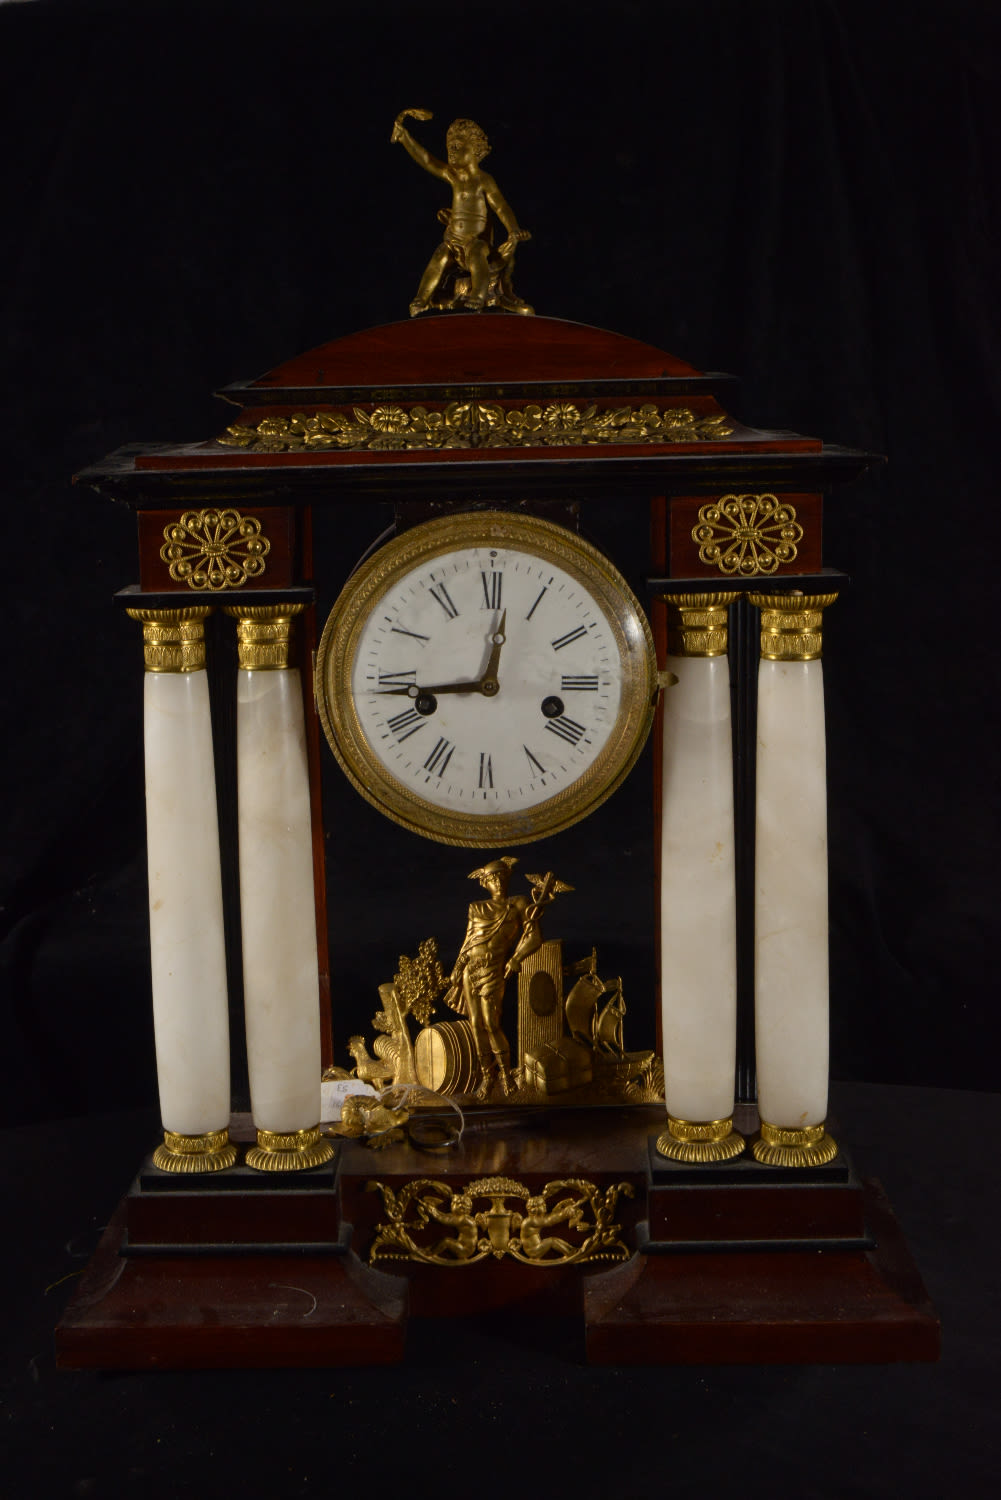 Beautiful Bilderrahmen Table Clock with Automata from the late 19th century, Austria, with Mercury a - Image 2 of 7